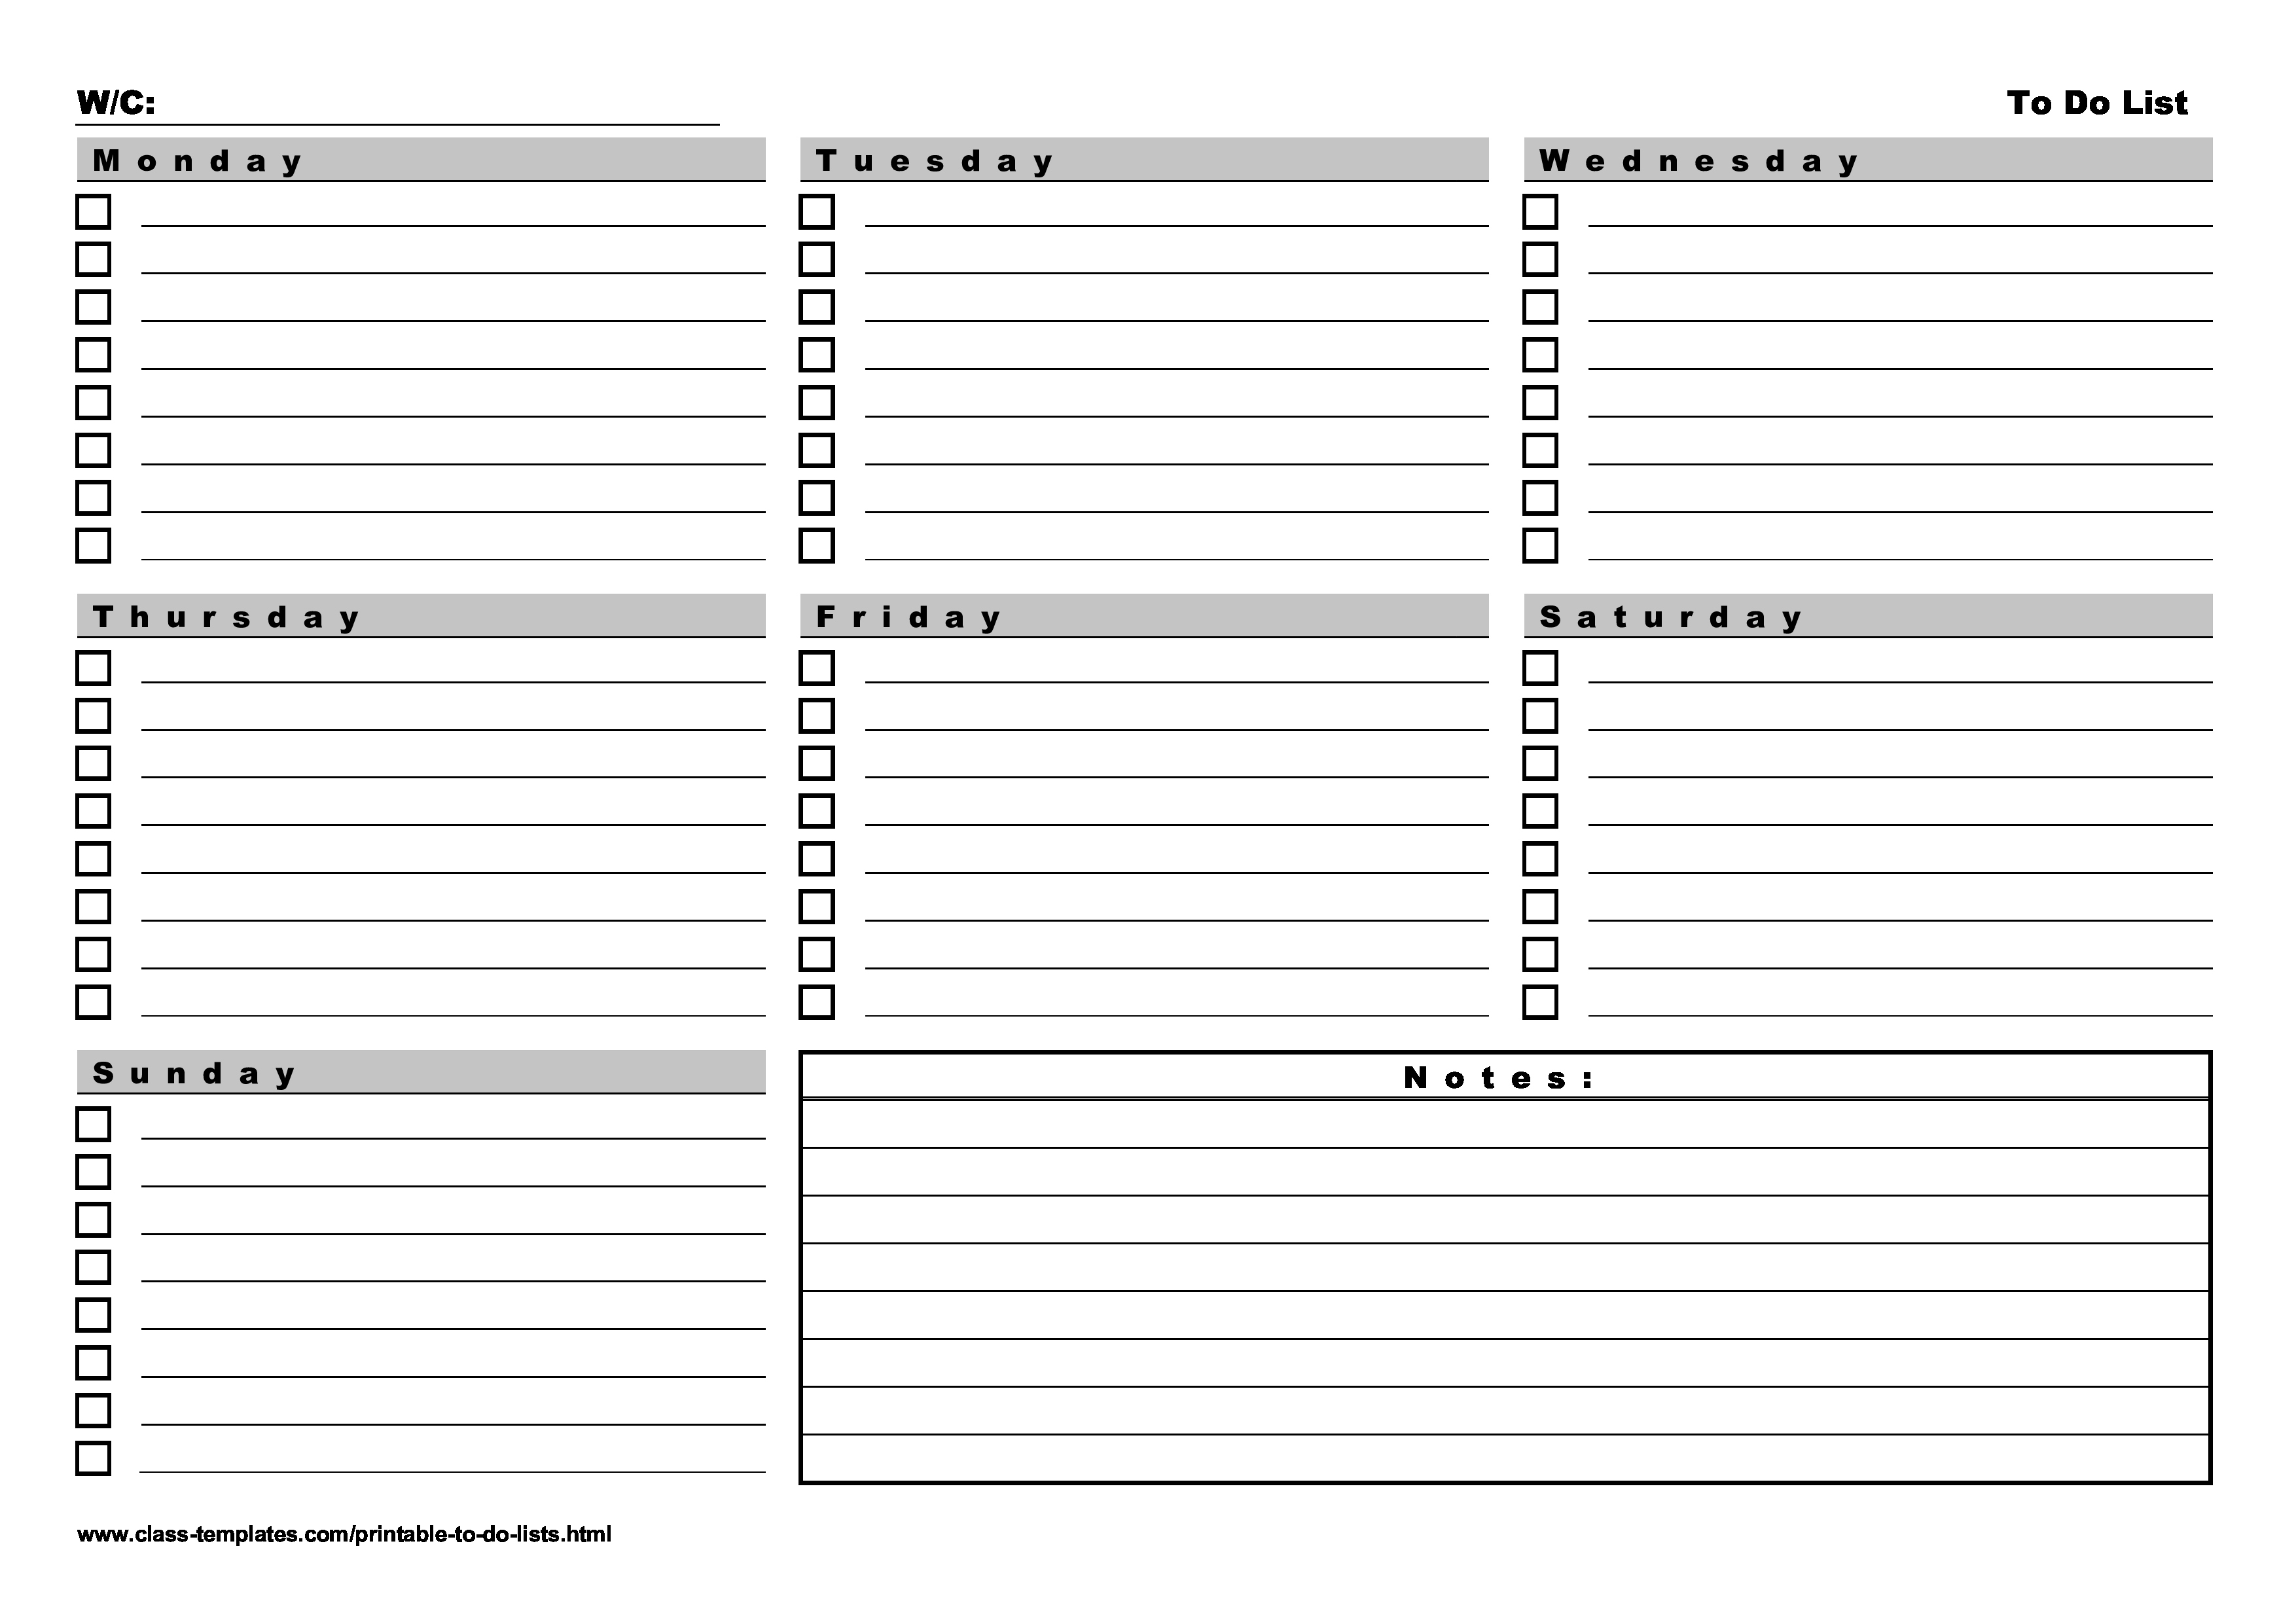 Professional to Do List Template Inspirational to Do List 7 Days A Week Landscape How to Make A